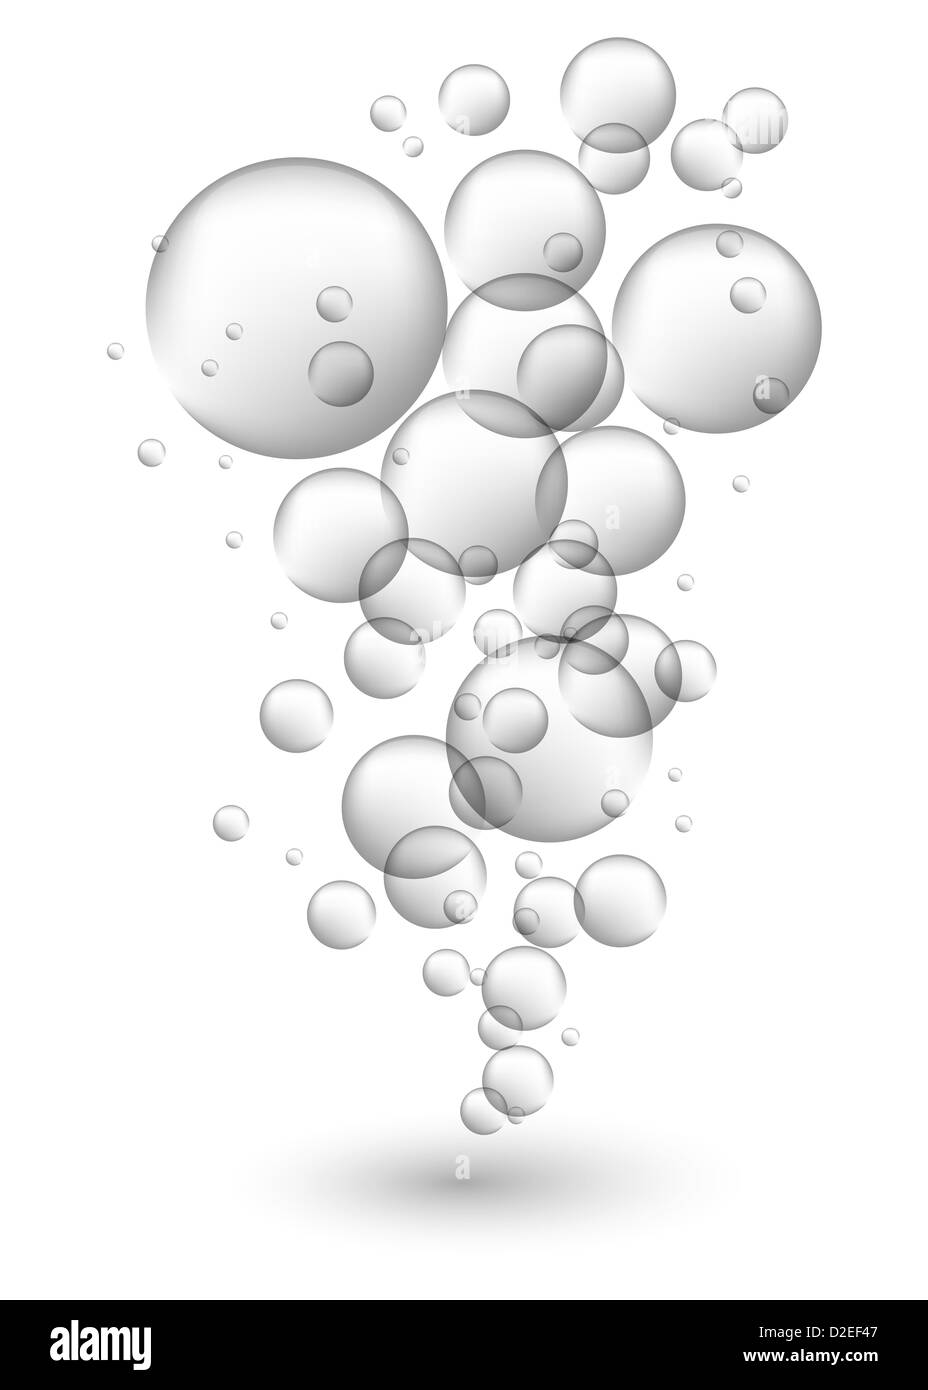 abstract water bubbles illustration. Stock Photo